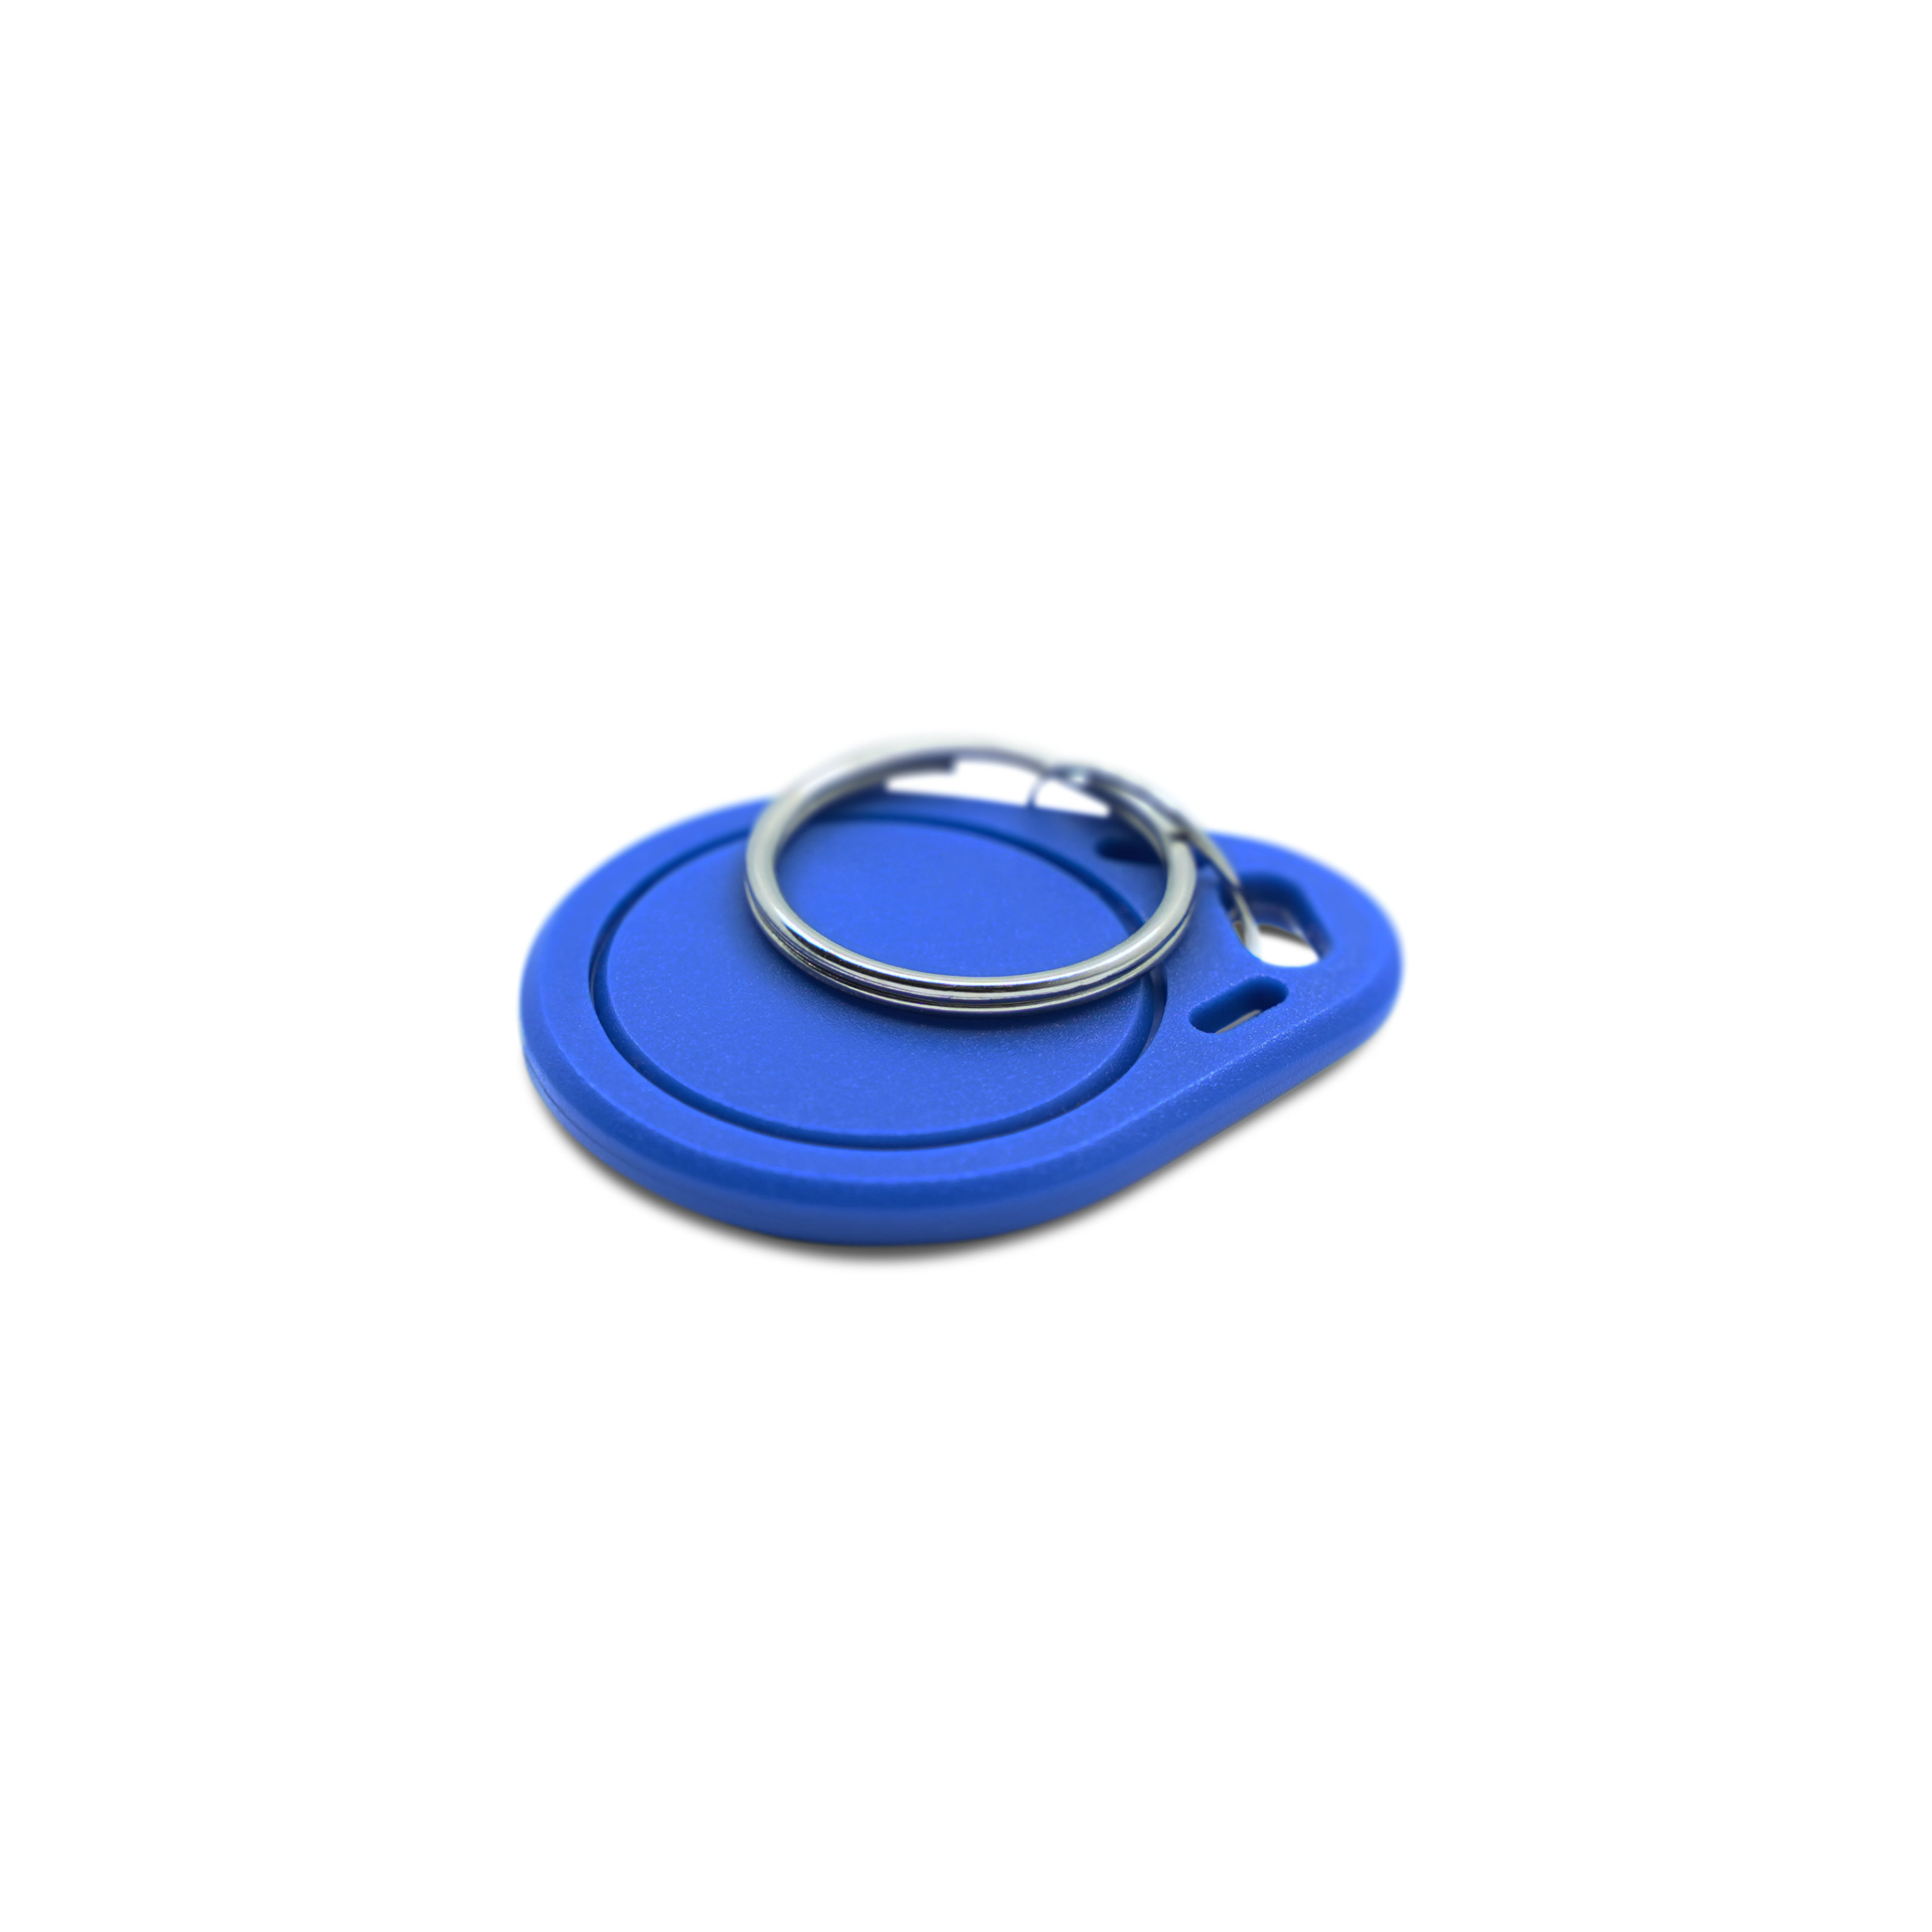 NFC tag ABS - 40 x 32 mm - MIFARE Classic 1k - 1024 Byte - blue